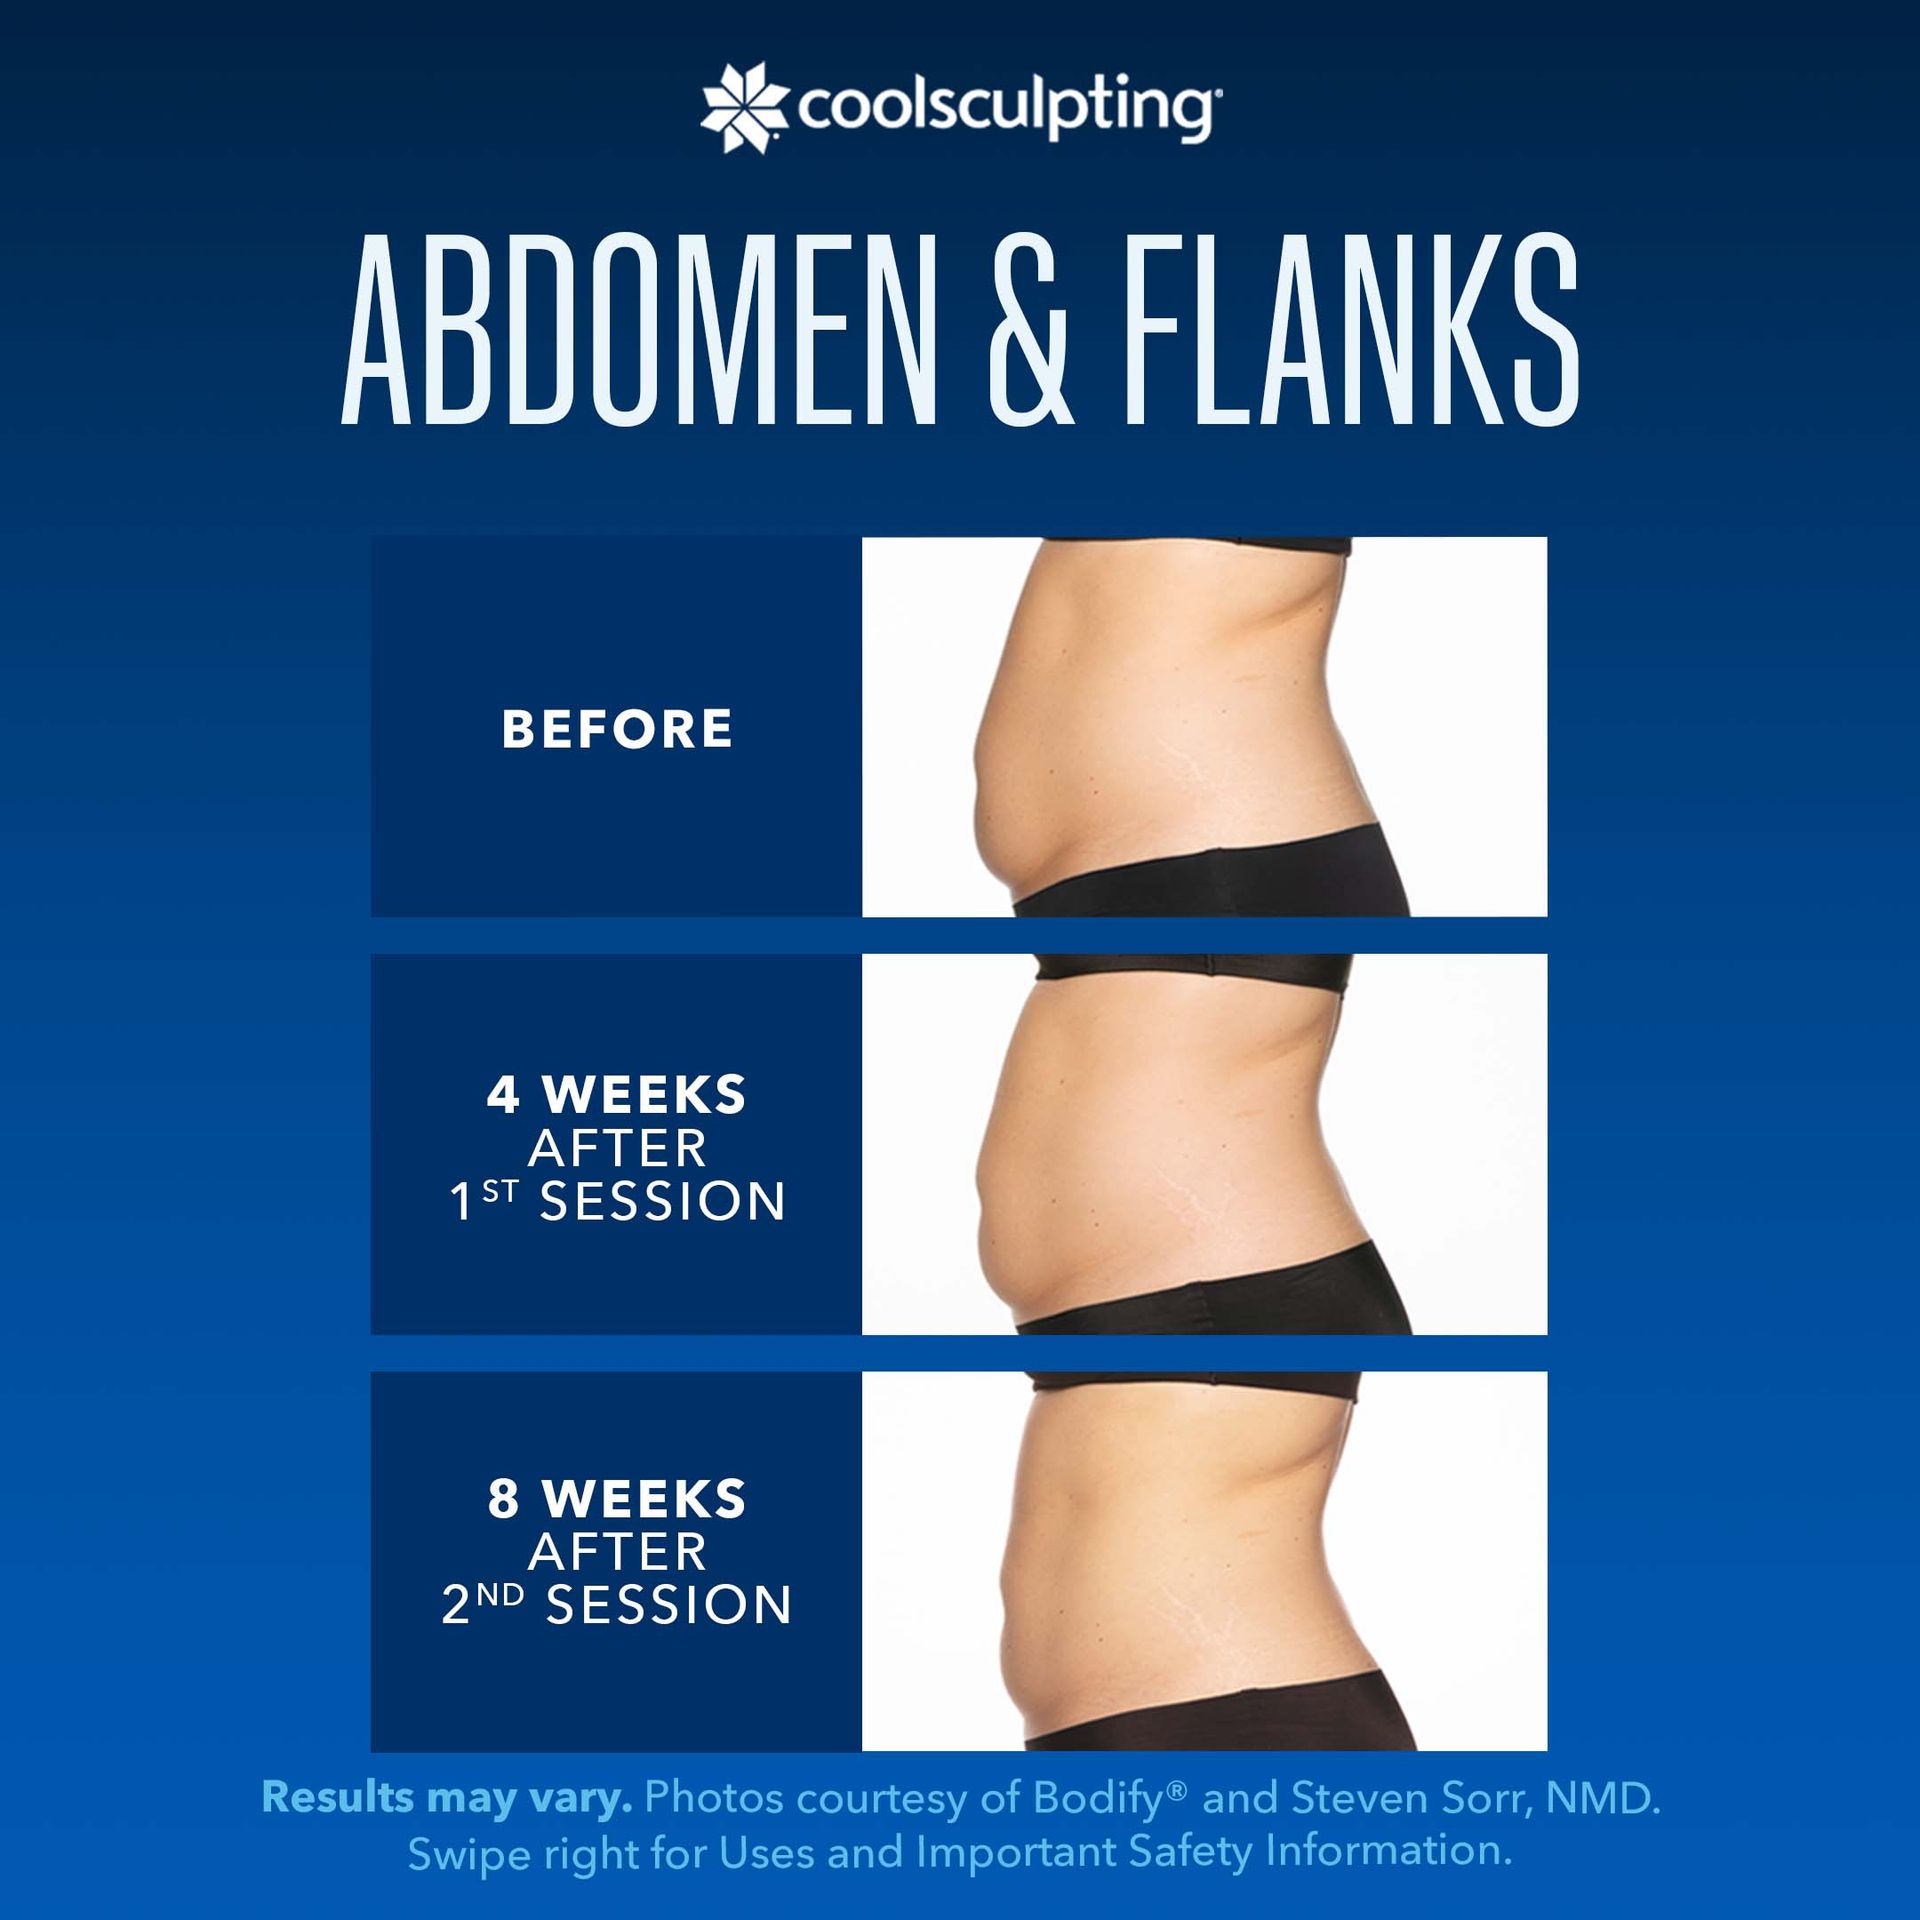 a before and after picture of a woman's abdomen and flanks for coolsculpting treatment